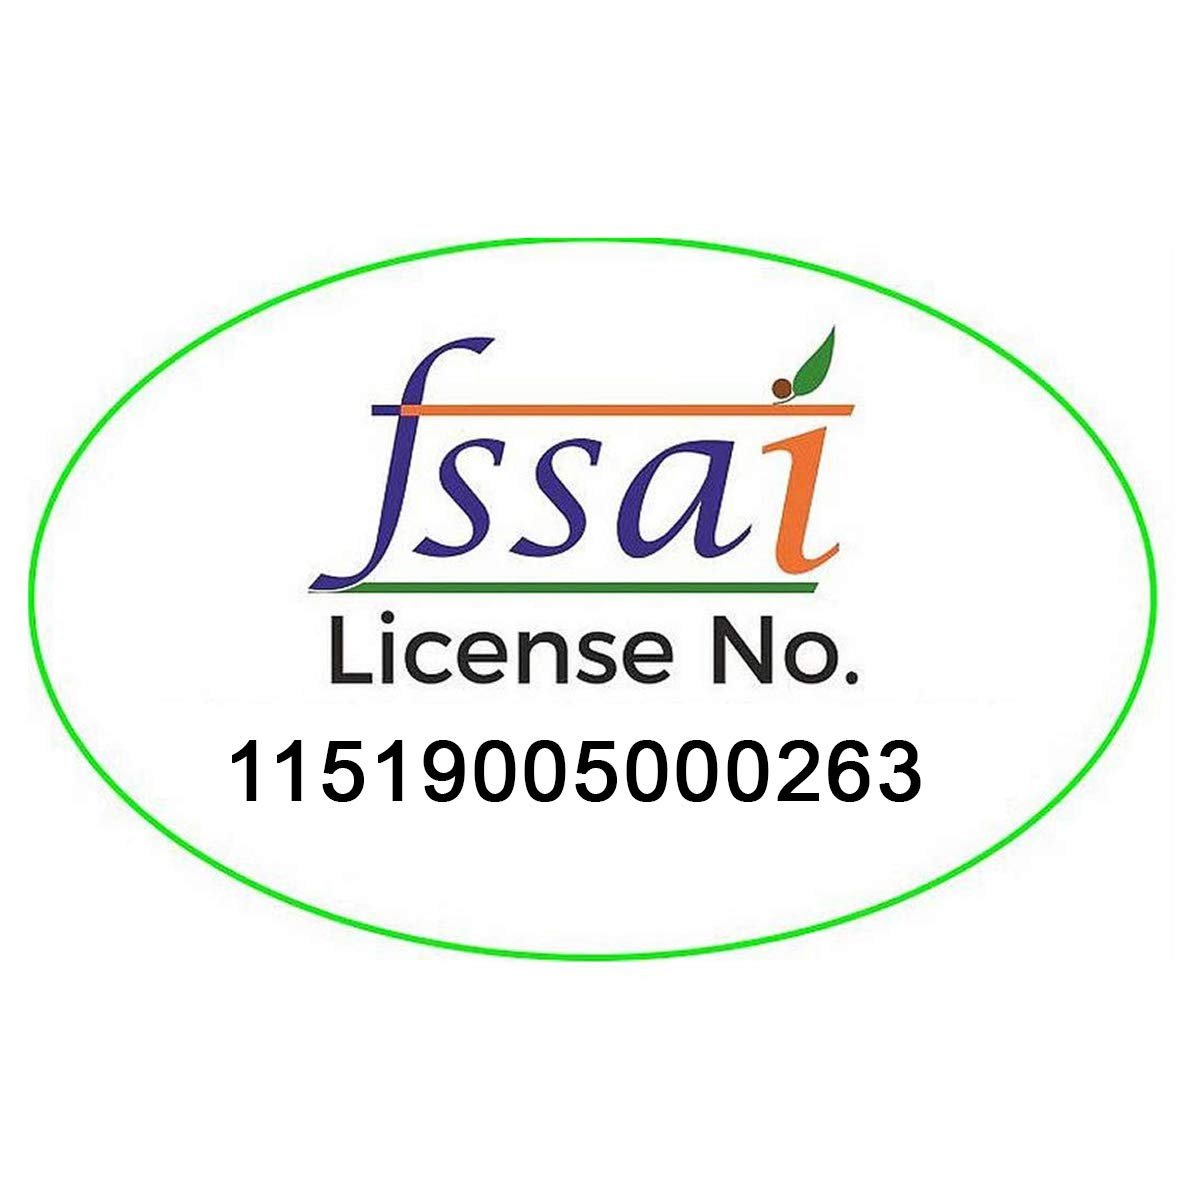 Check Fssai Licence No - Eat Anytime